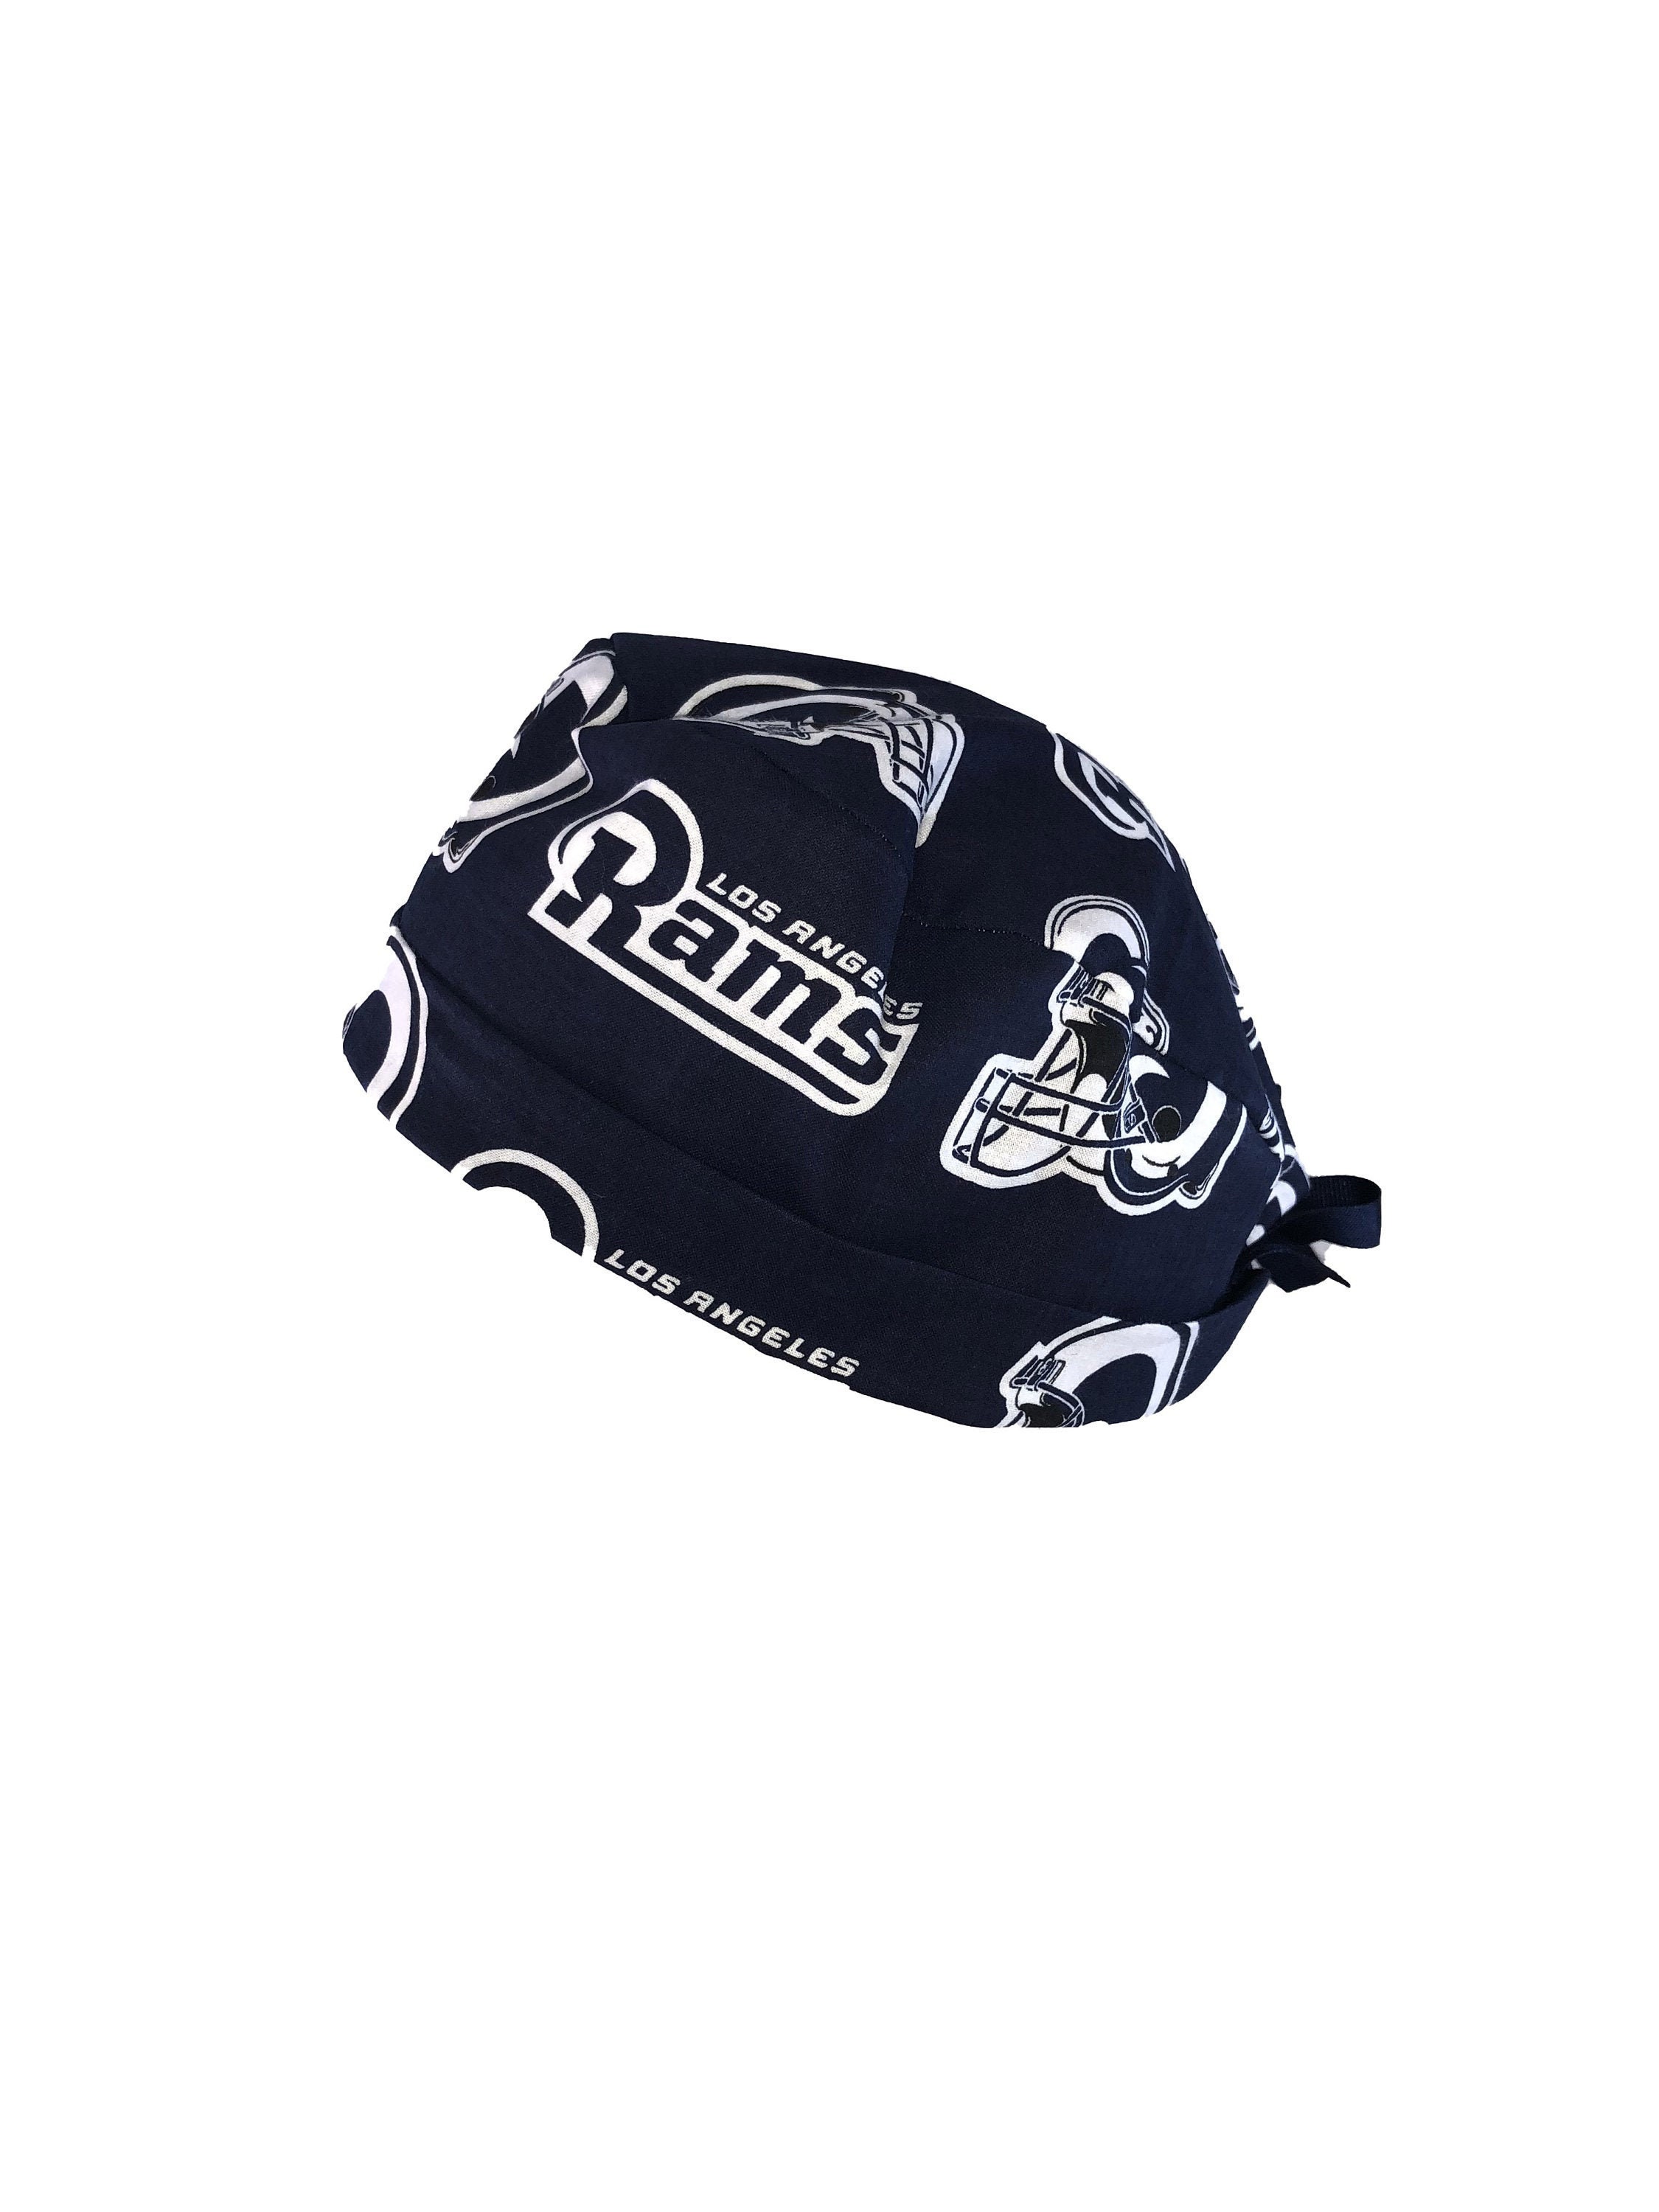 La Rams Blue Nfl Unisex Tie Back Scrub Cap, Nurse Hat, Surgical Or Surgery, Operating Room. With Or Without Ponytail Holder